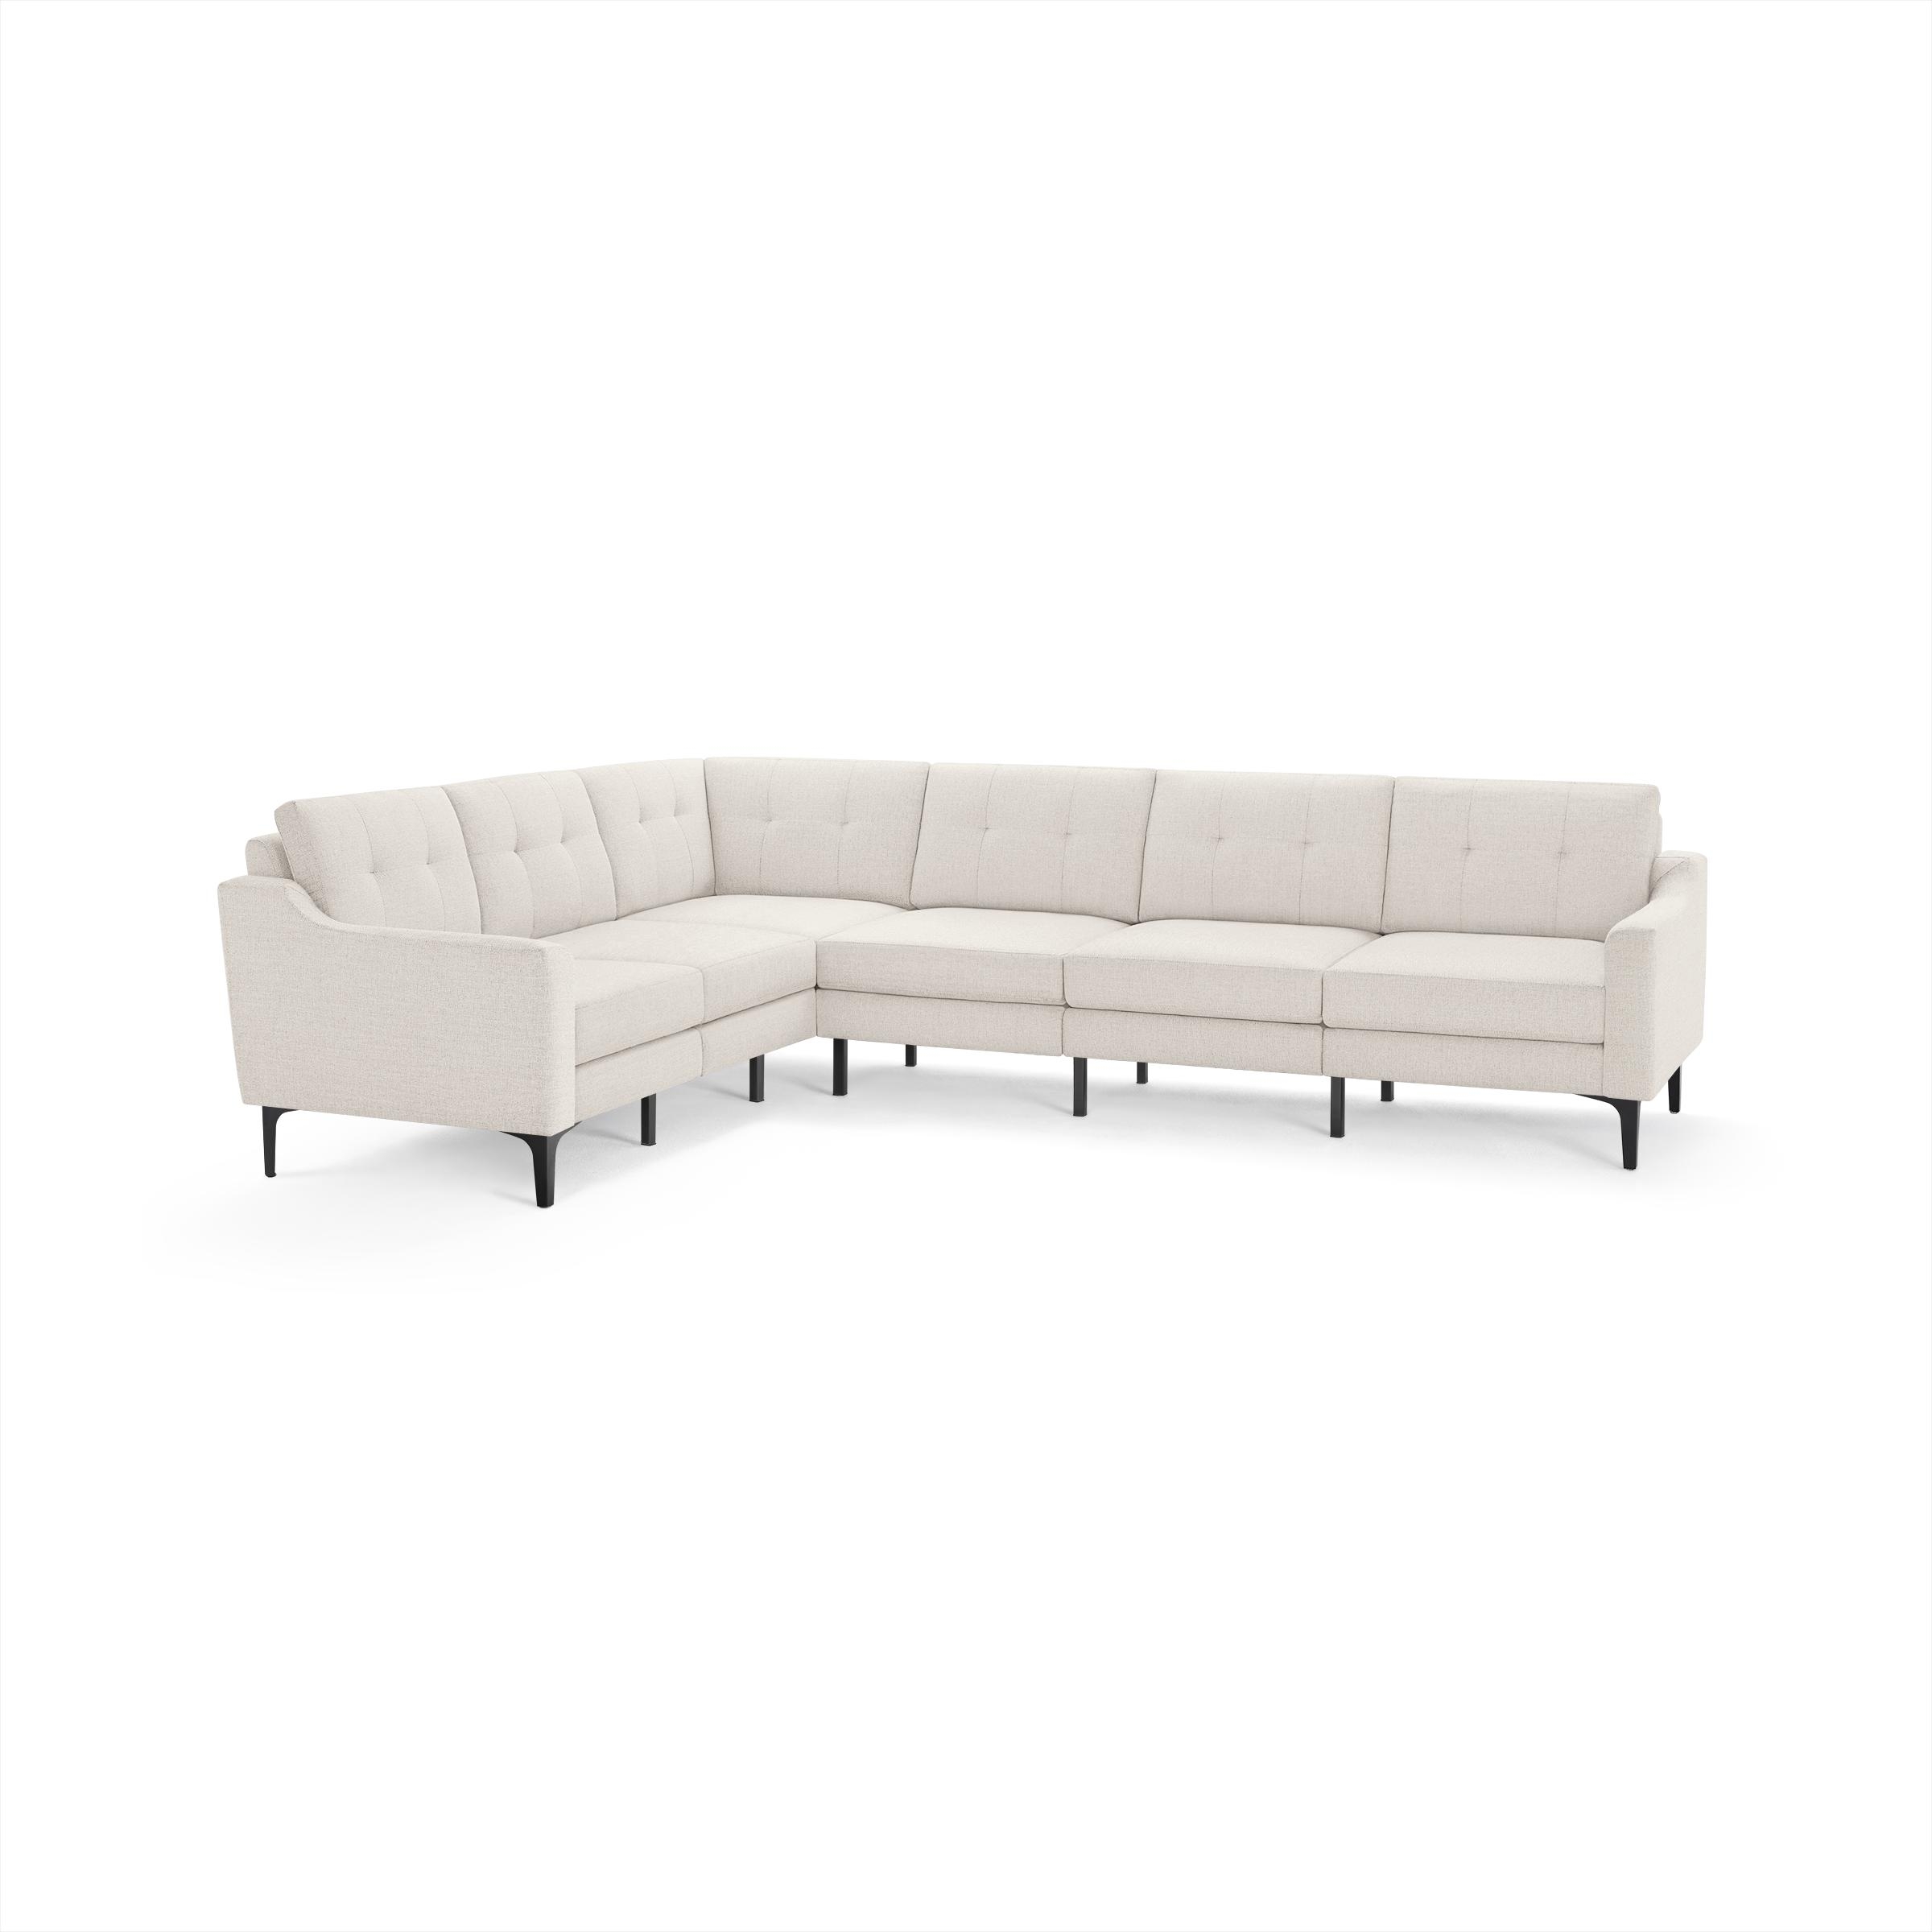 Nomad 6-Seat Corner Sectional in Ivory - Image 0